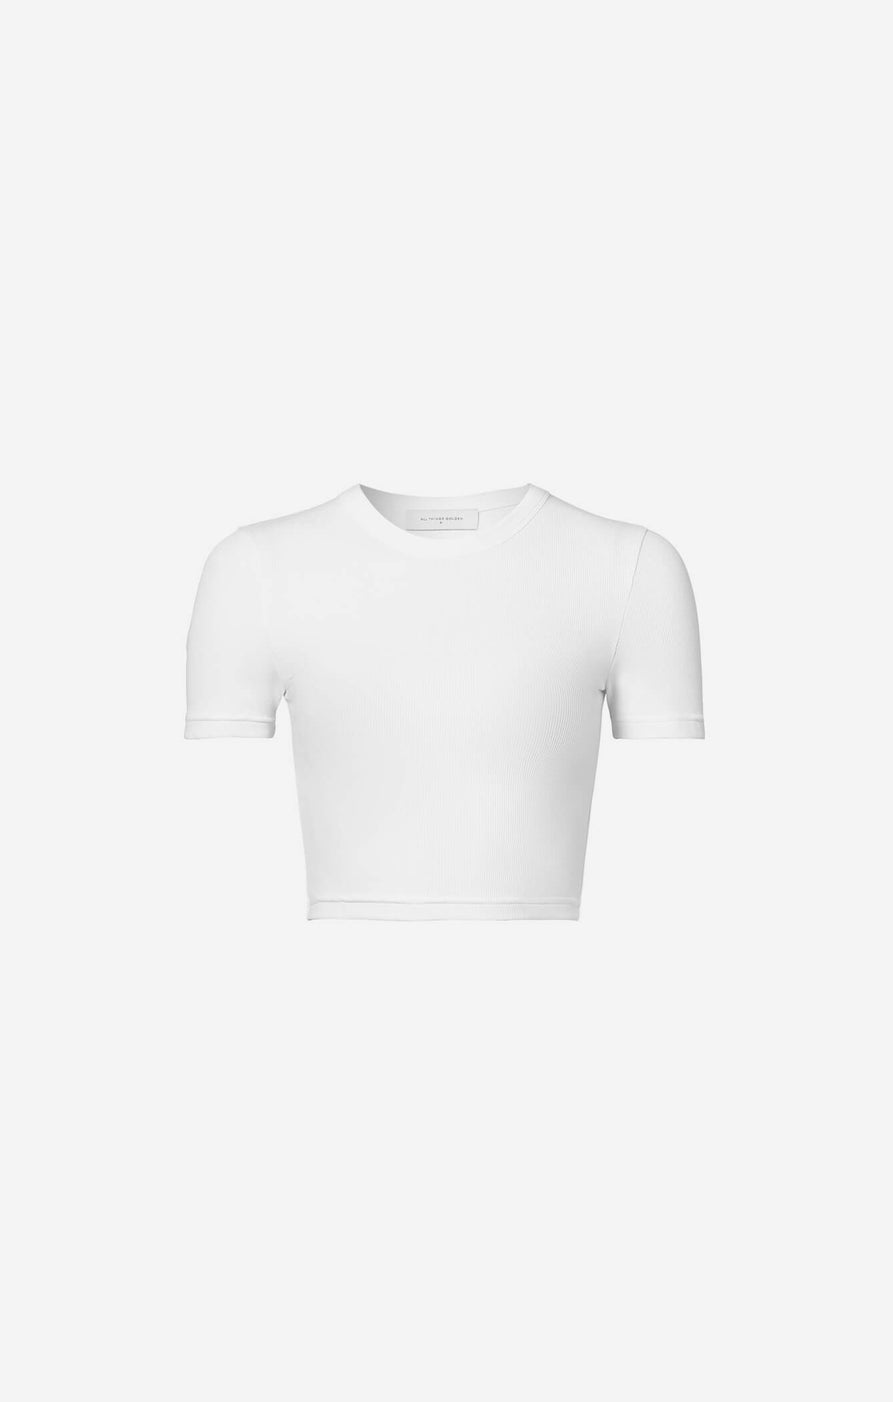 THE LUXE RIB BABY CROP TEE - WHITE